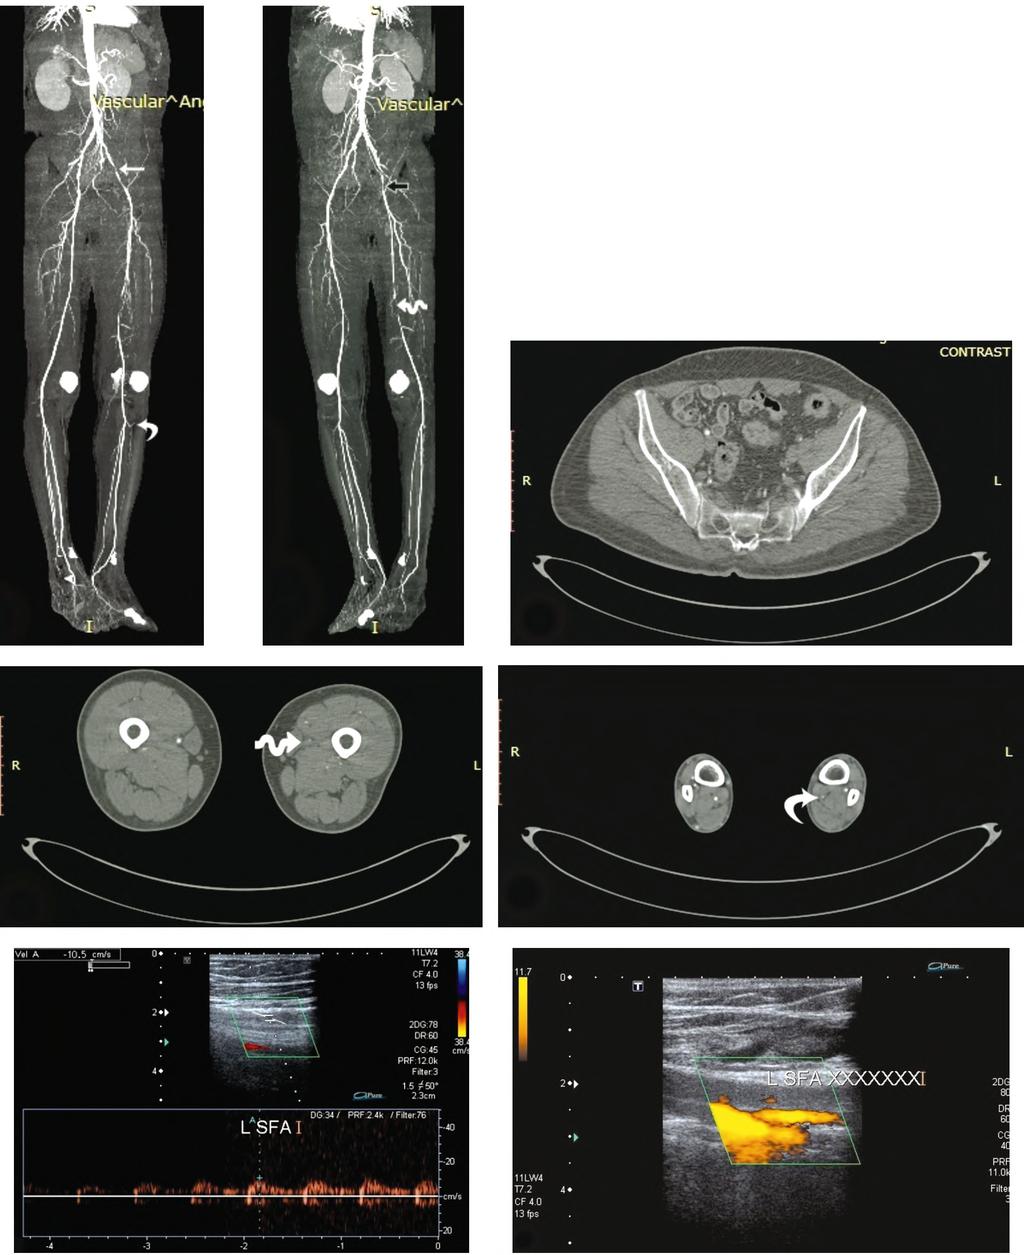 Nadine R. Barsoum, et al. 179 (A) (B) (C) (D) (E) (F) Fig. (1): (A-G): Male diabetic and hypertensive patient, 61 years old, complaining from severe pain in the left leg.